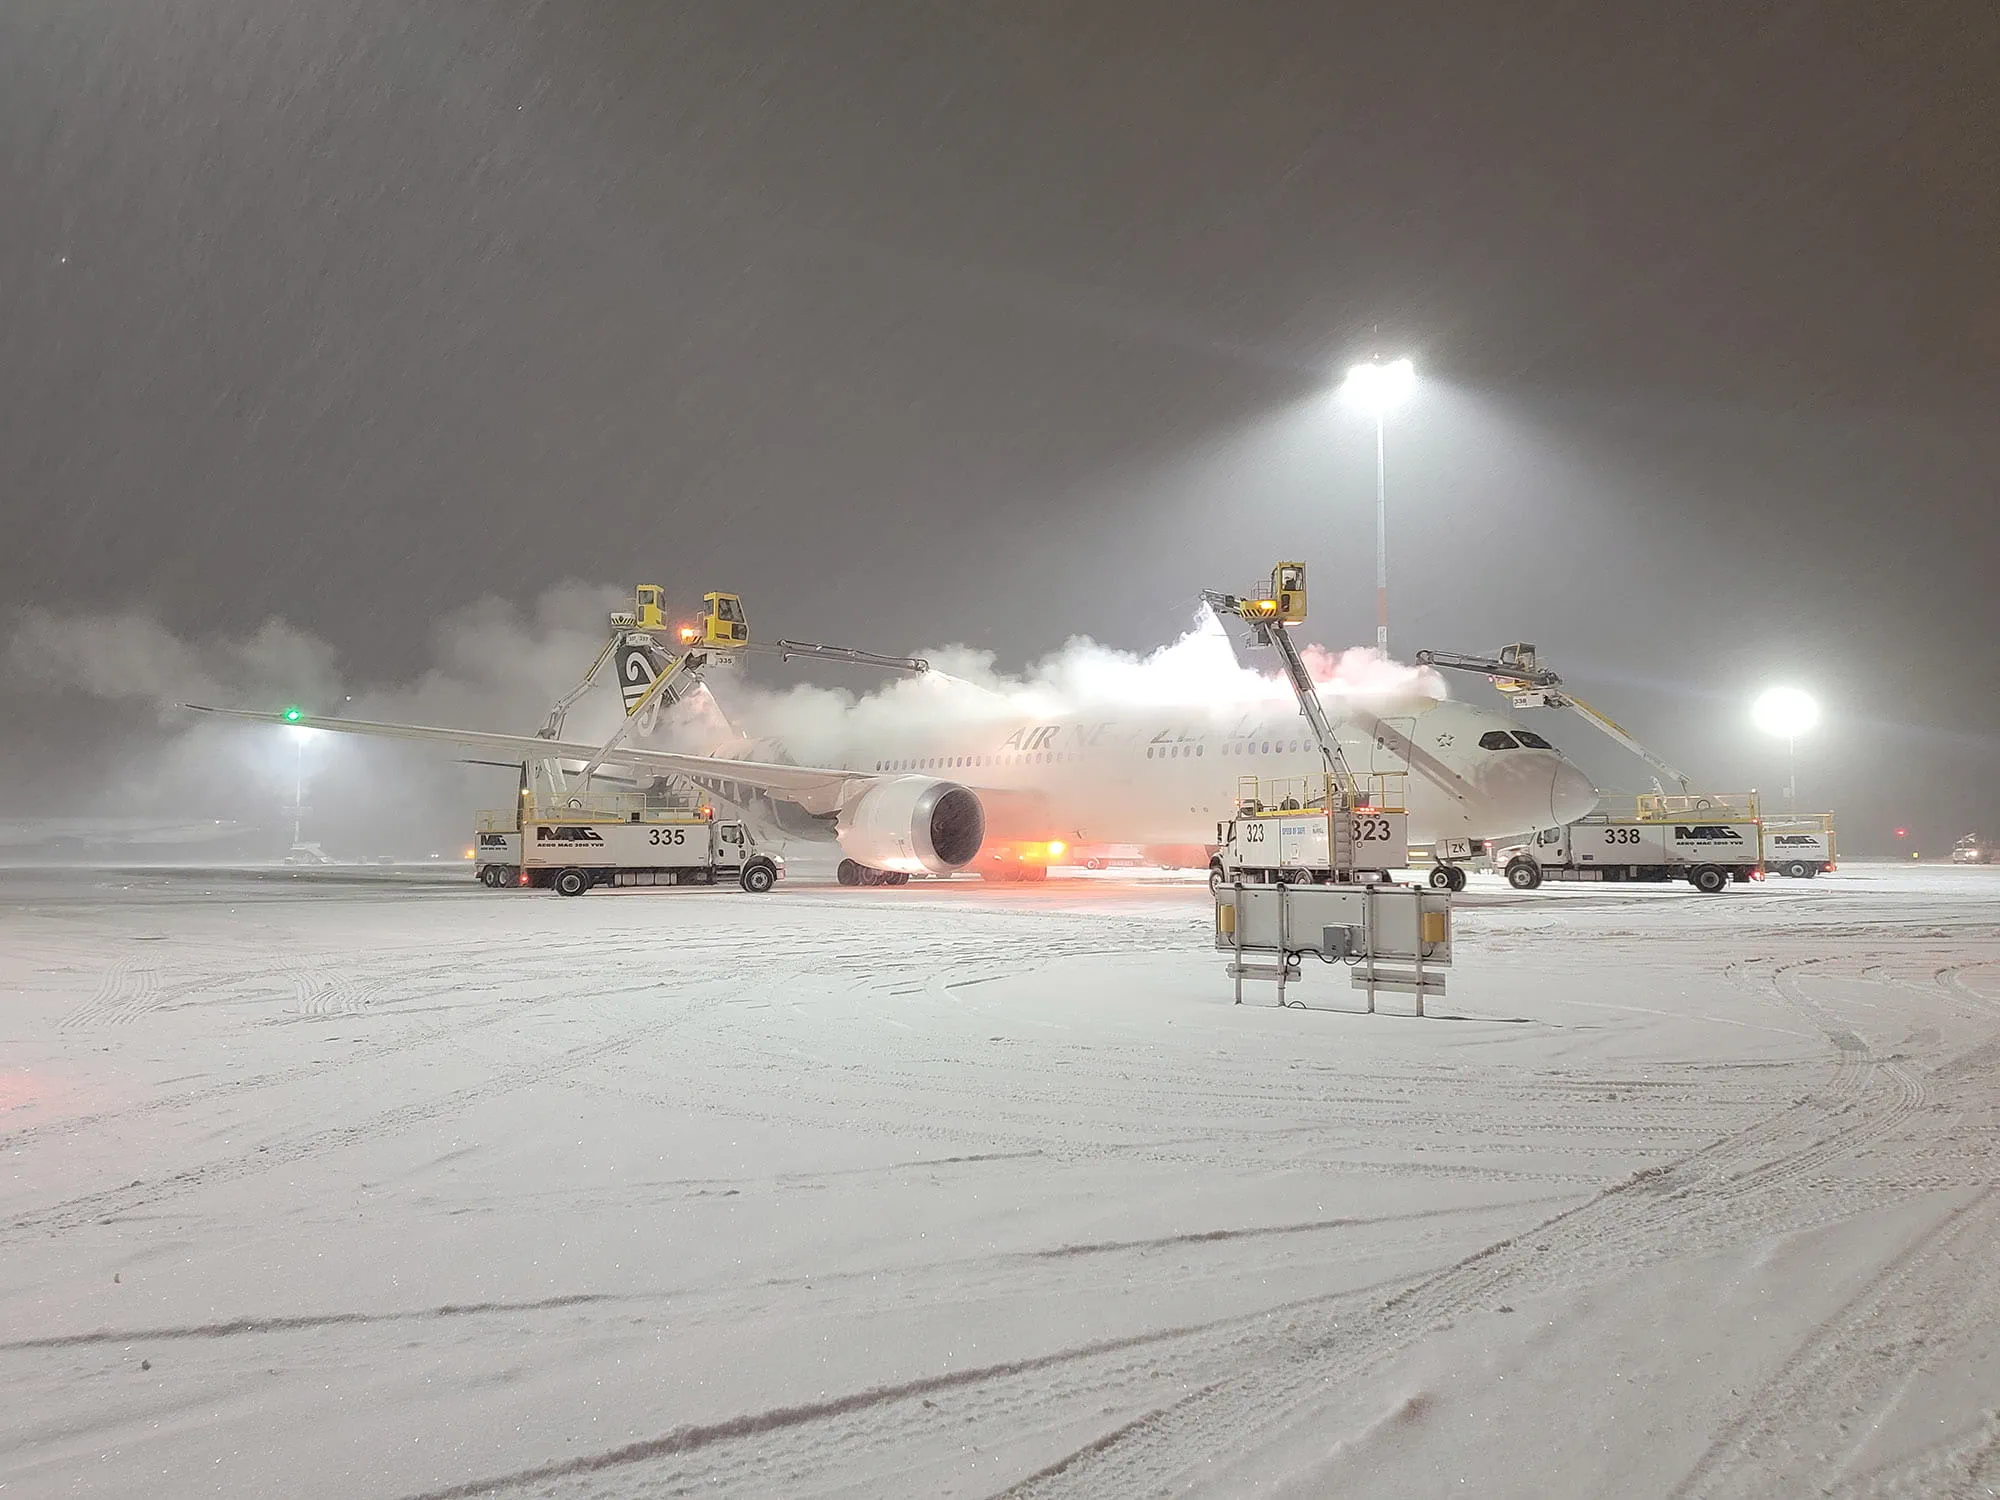 A large white airplane being maintained on the ground during a heavy snowstorm